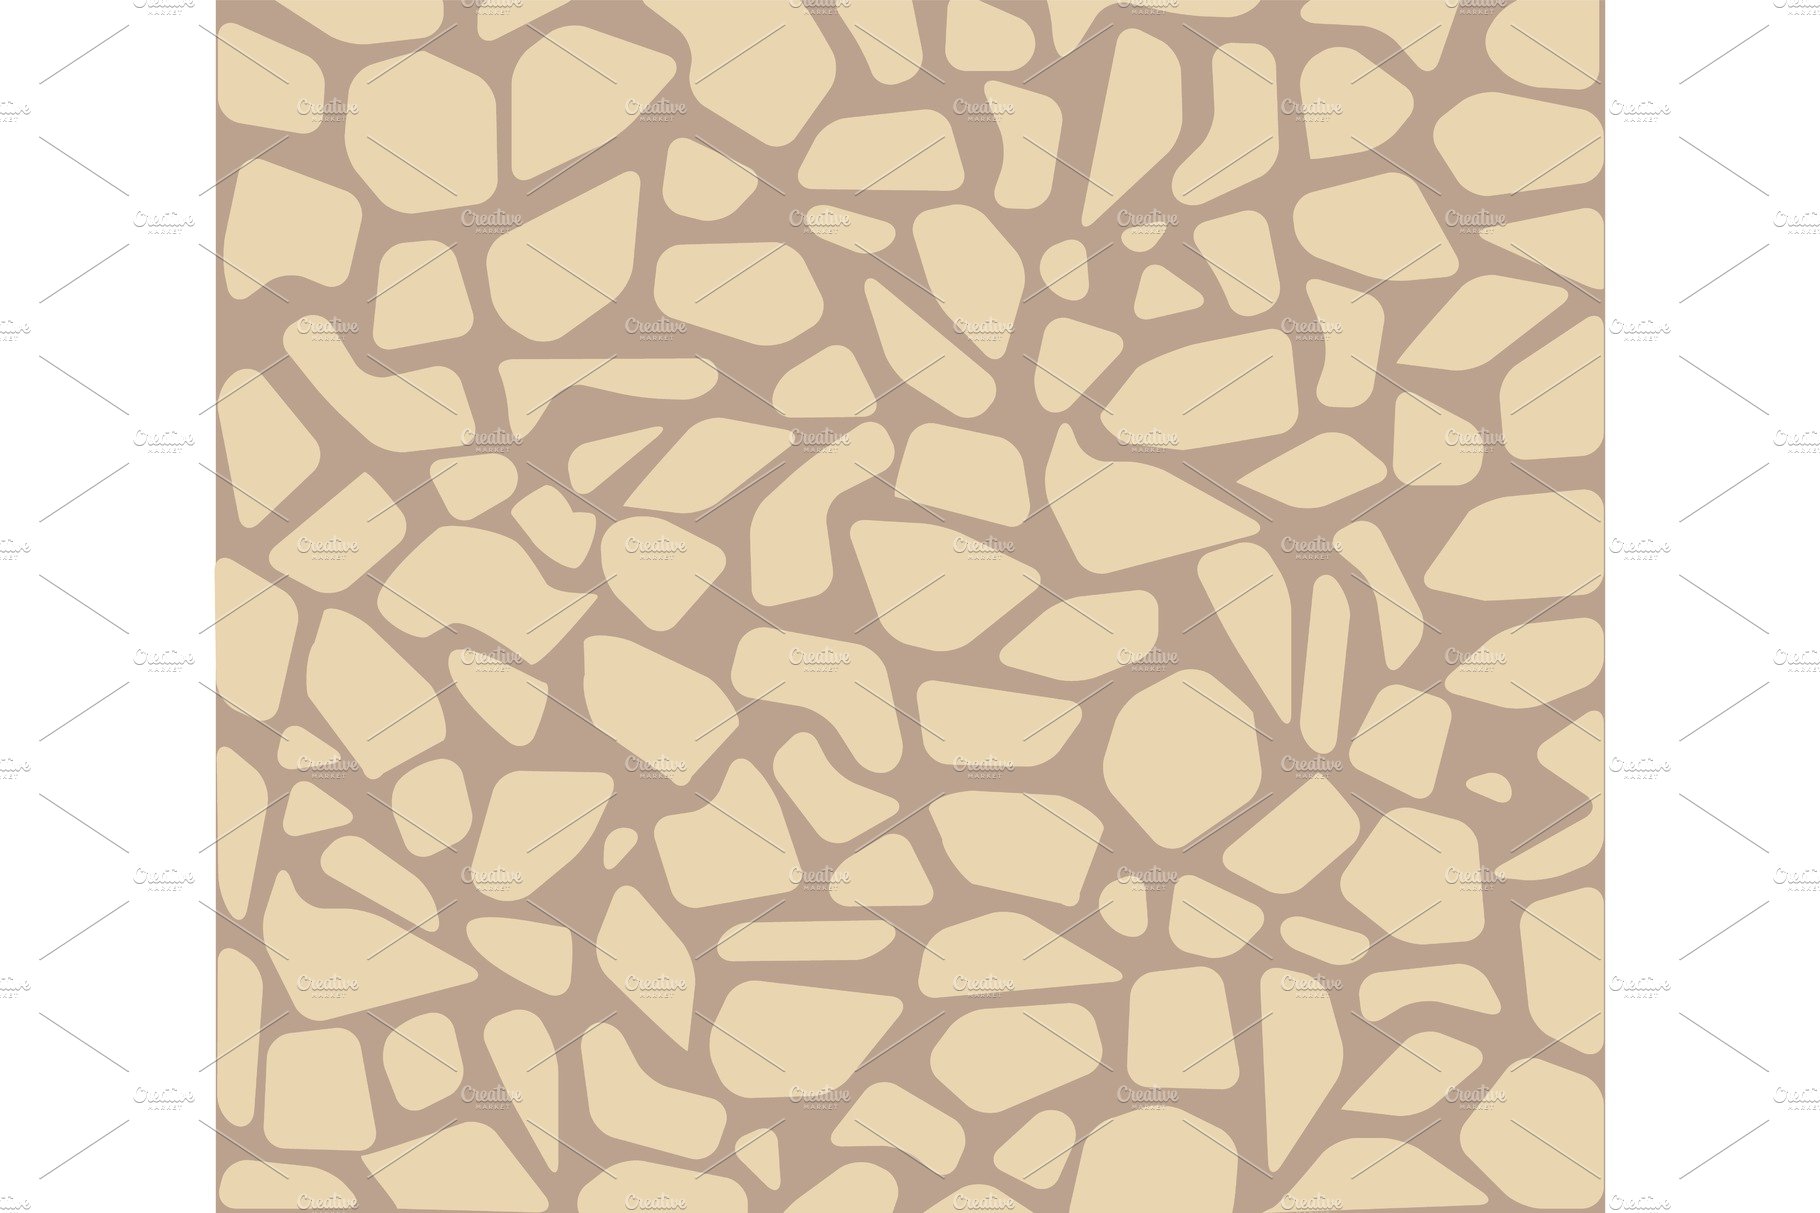 Paved Stone Seamless Pattern cover image.